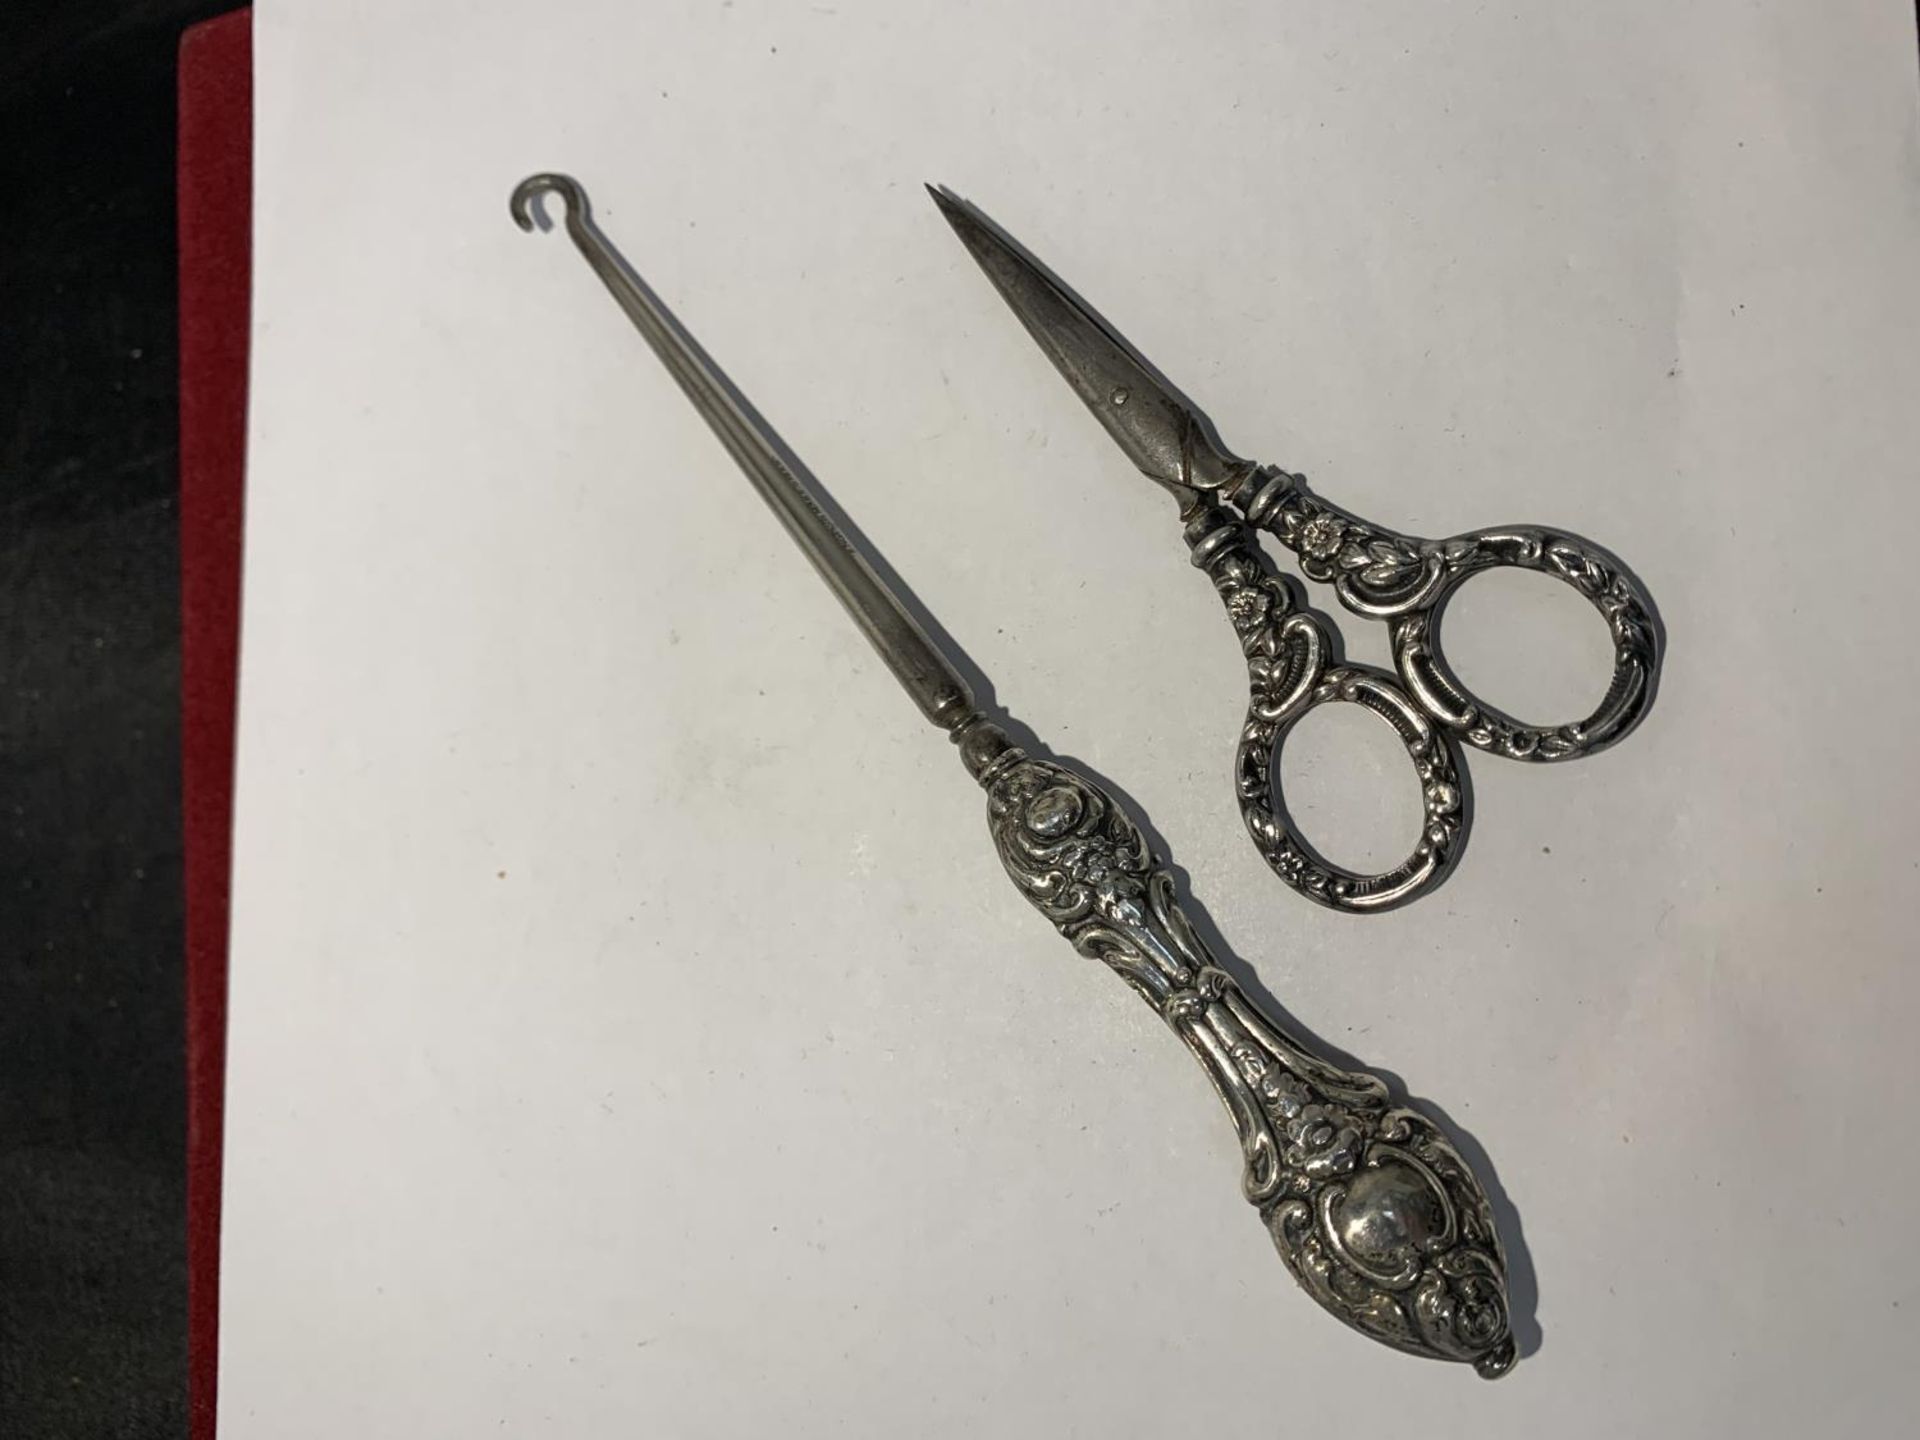 A SILVER HANDLED BUTTON HOOK AND A PAIR OF SILVER HANDLED SISSORS - Image 2 of 2